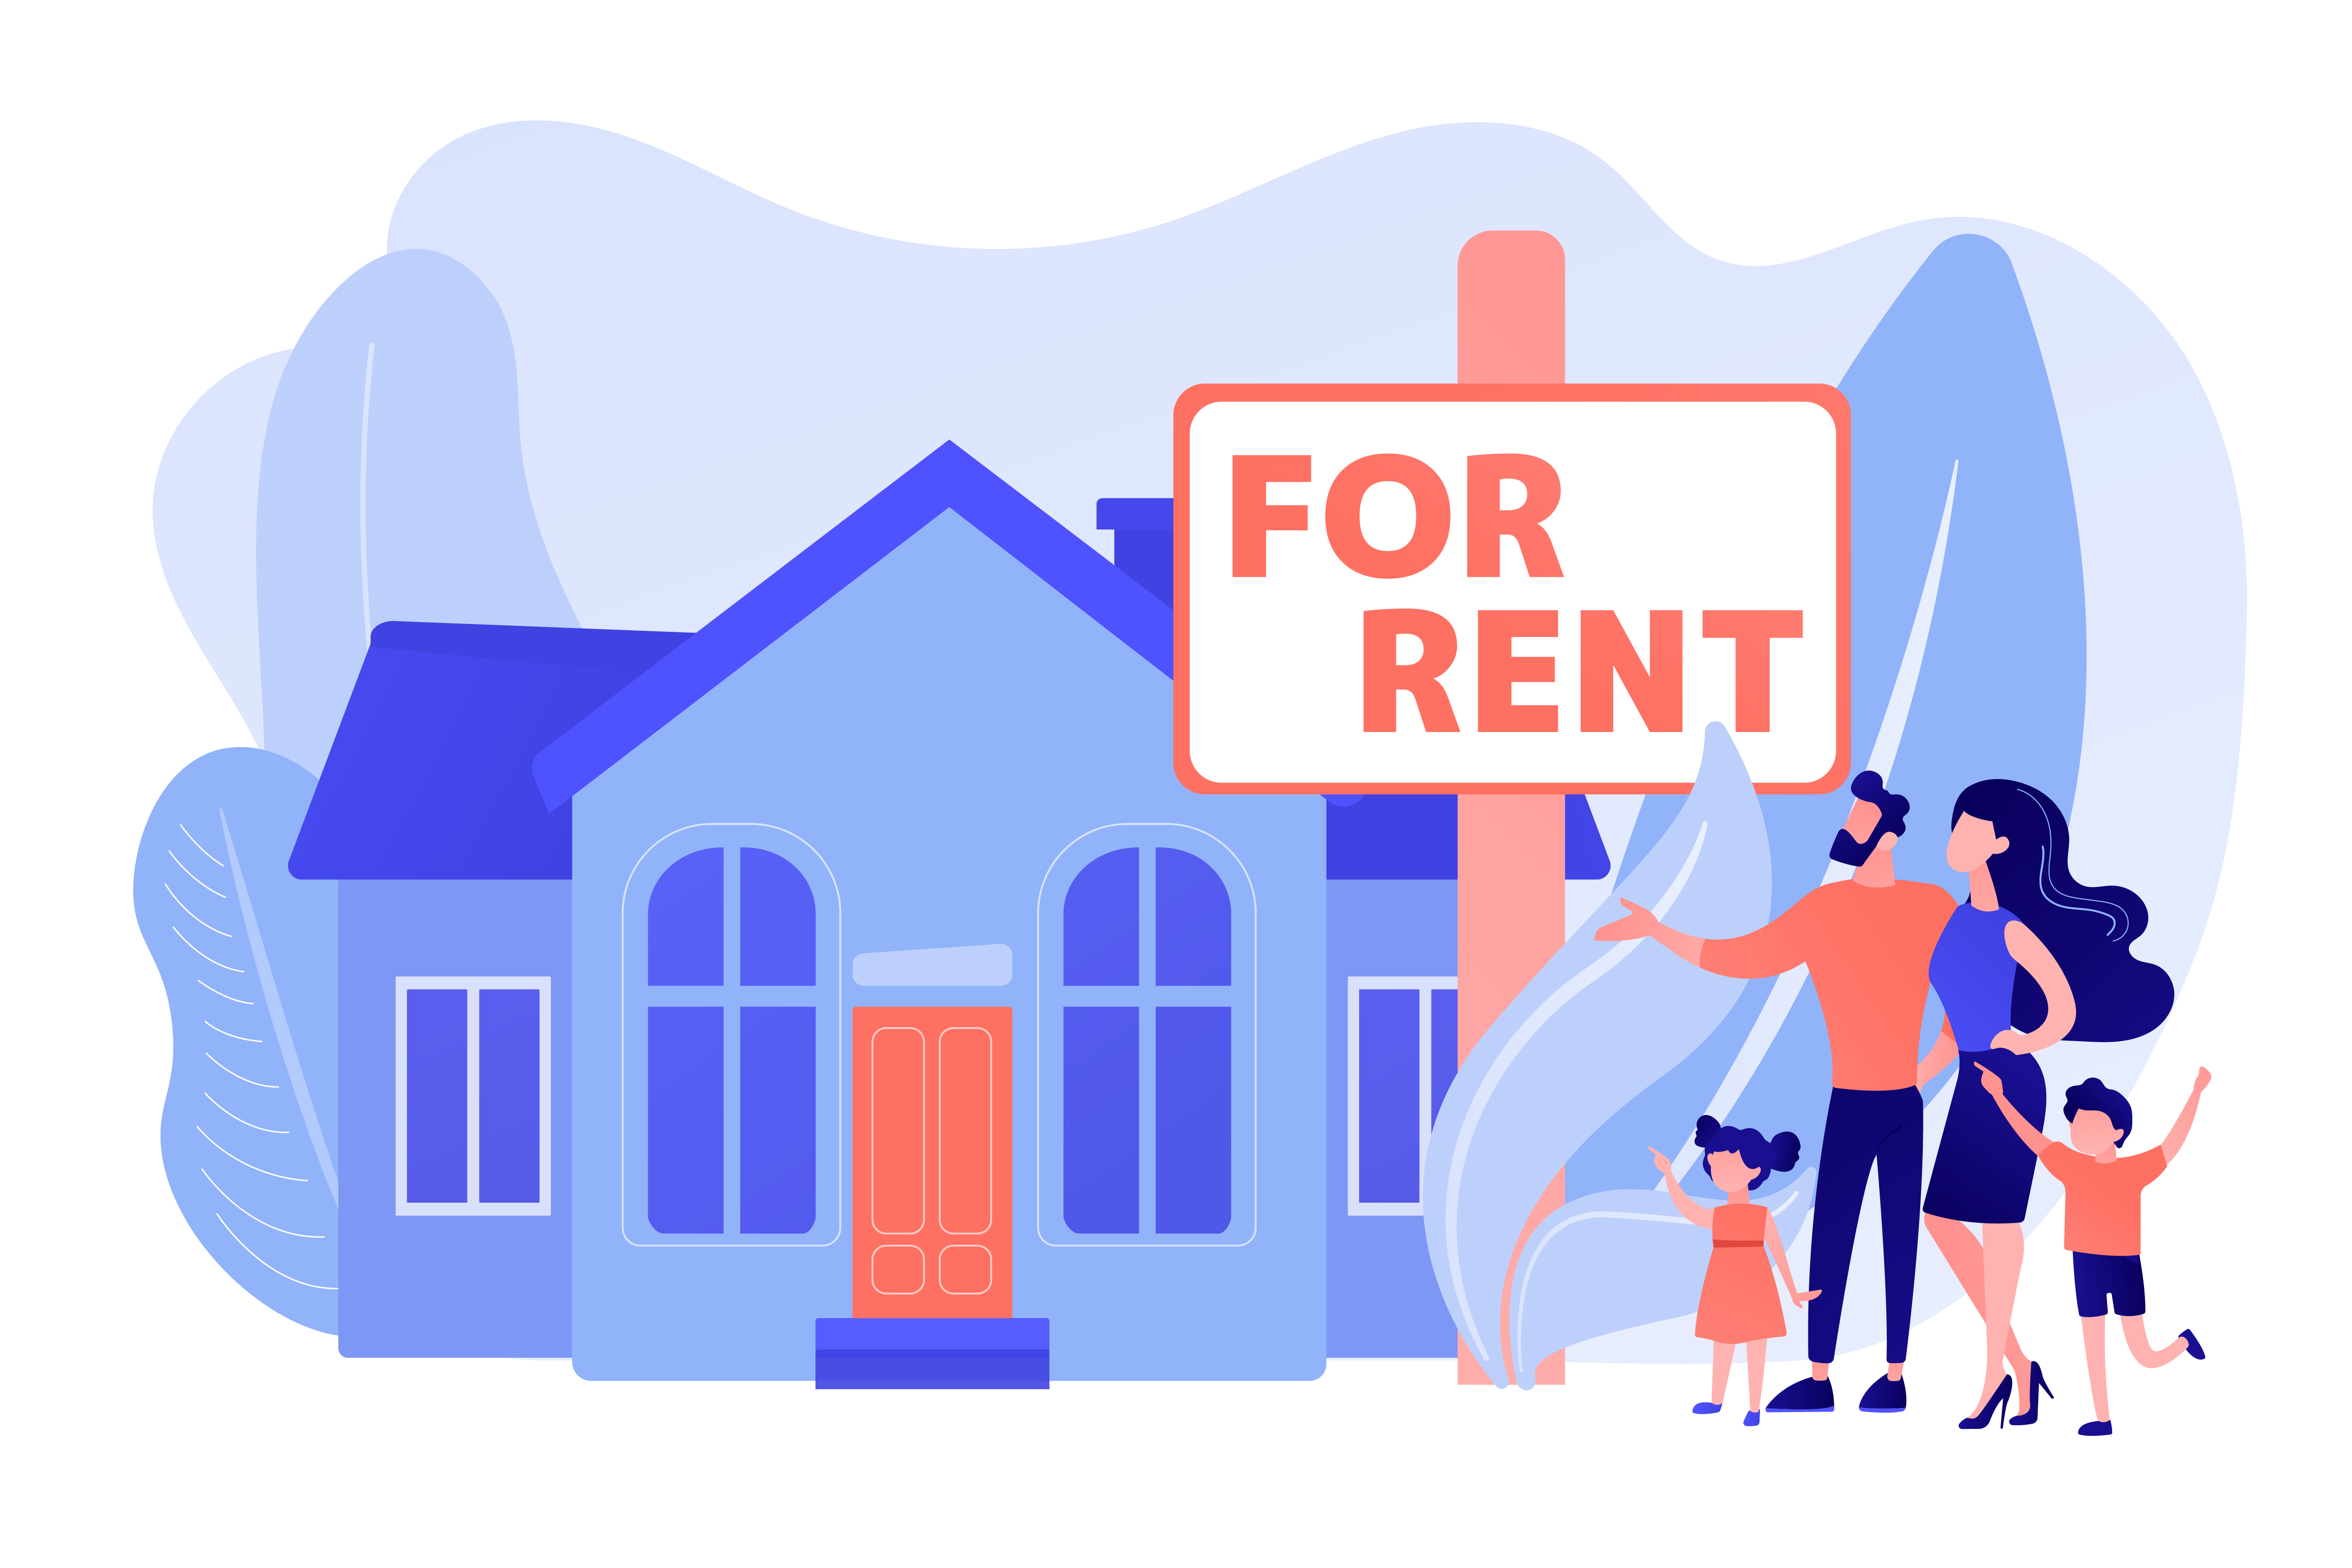 Ready to Rent Your Dream Home? Read This Guide First